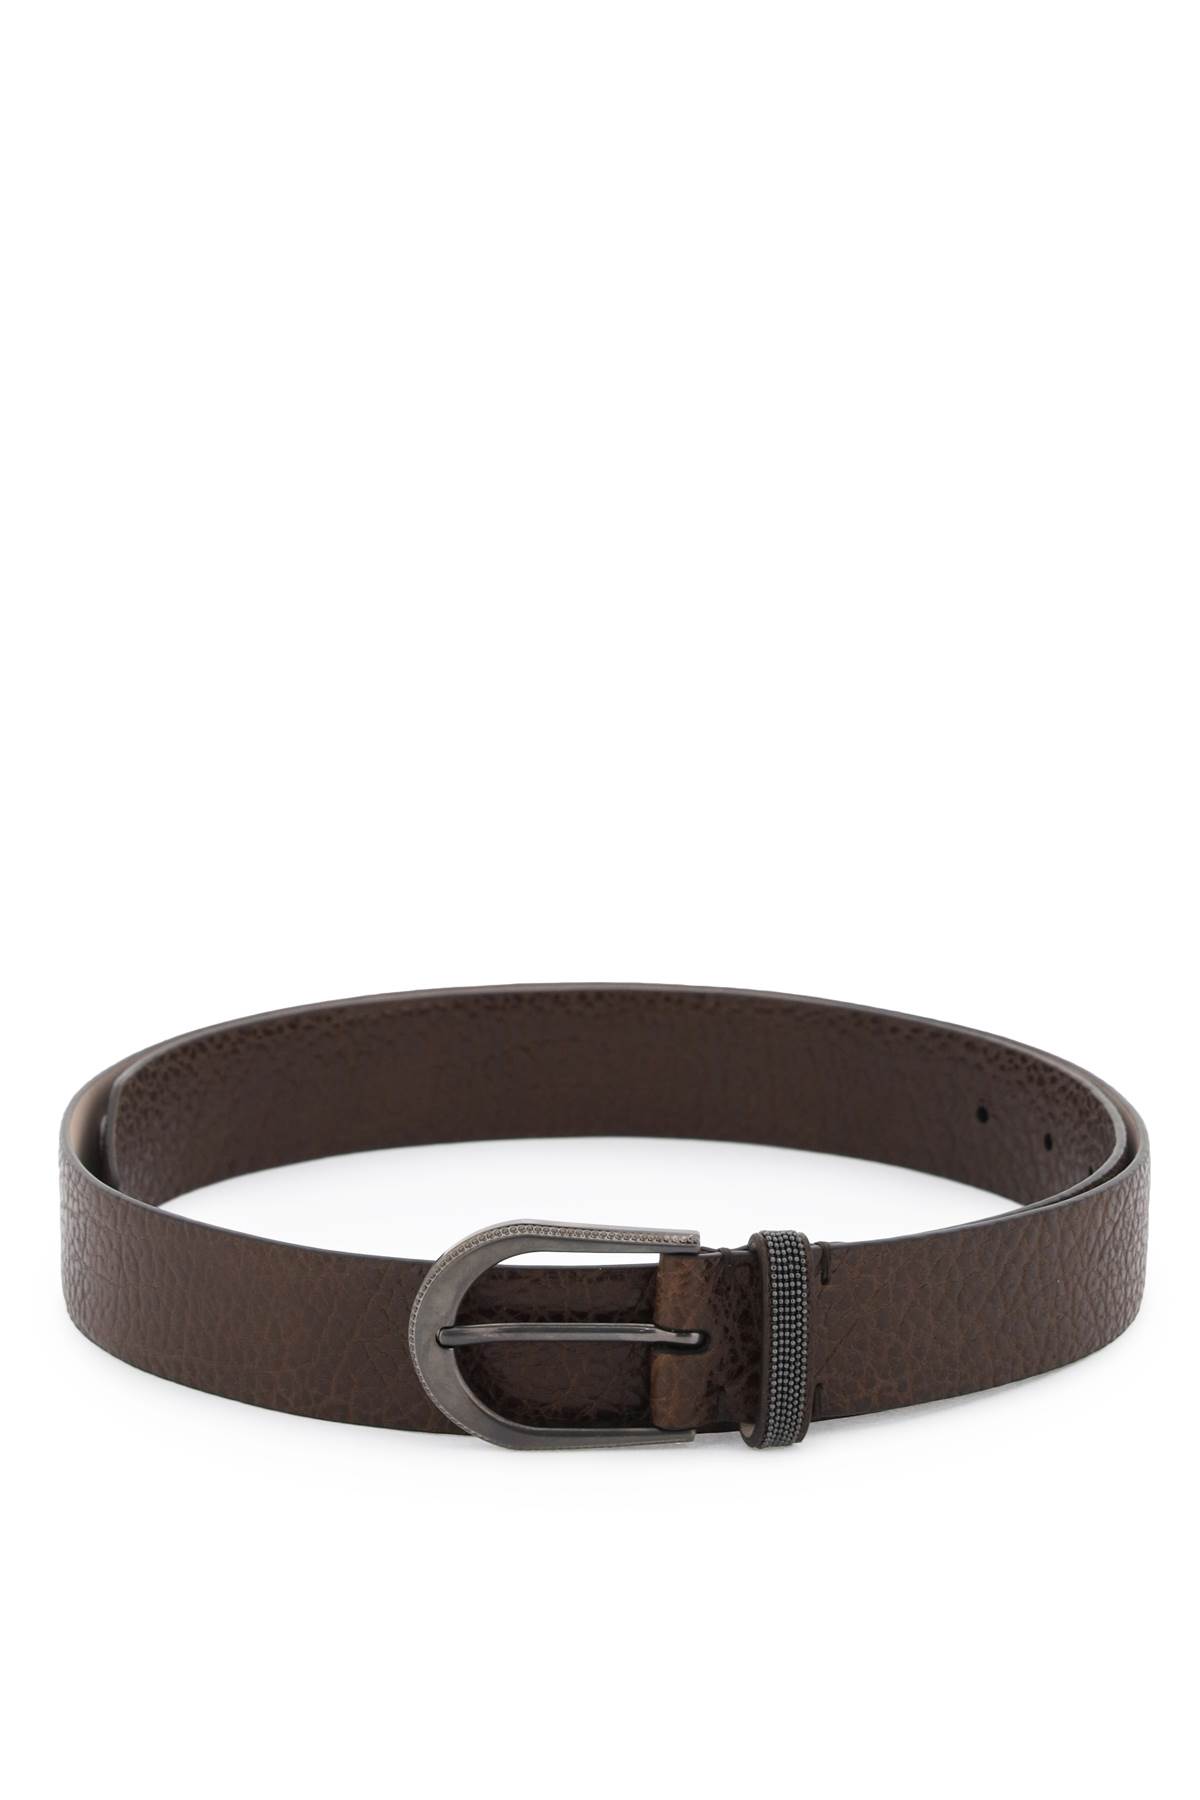 BRUNELLO CUCINELLI LEATHER BELT WITH DETAILED BUCKLE